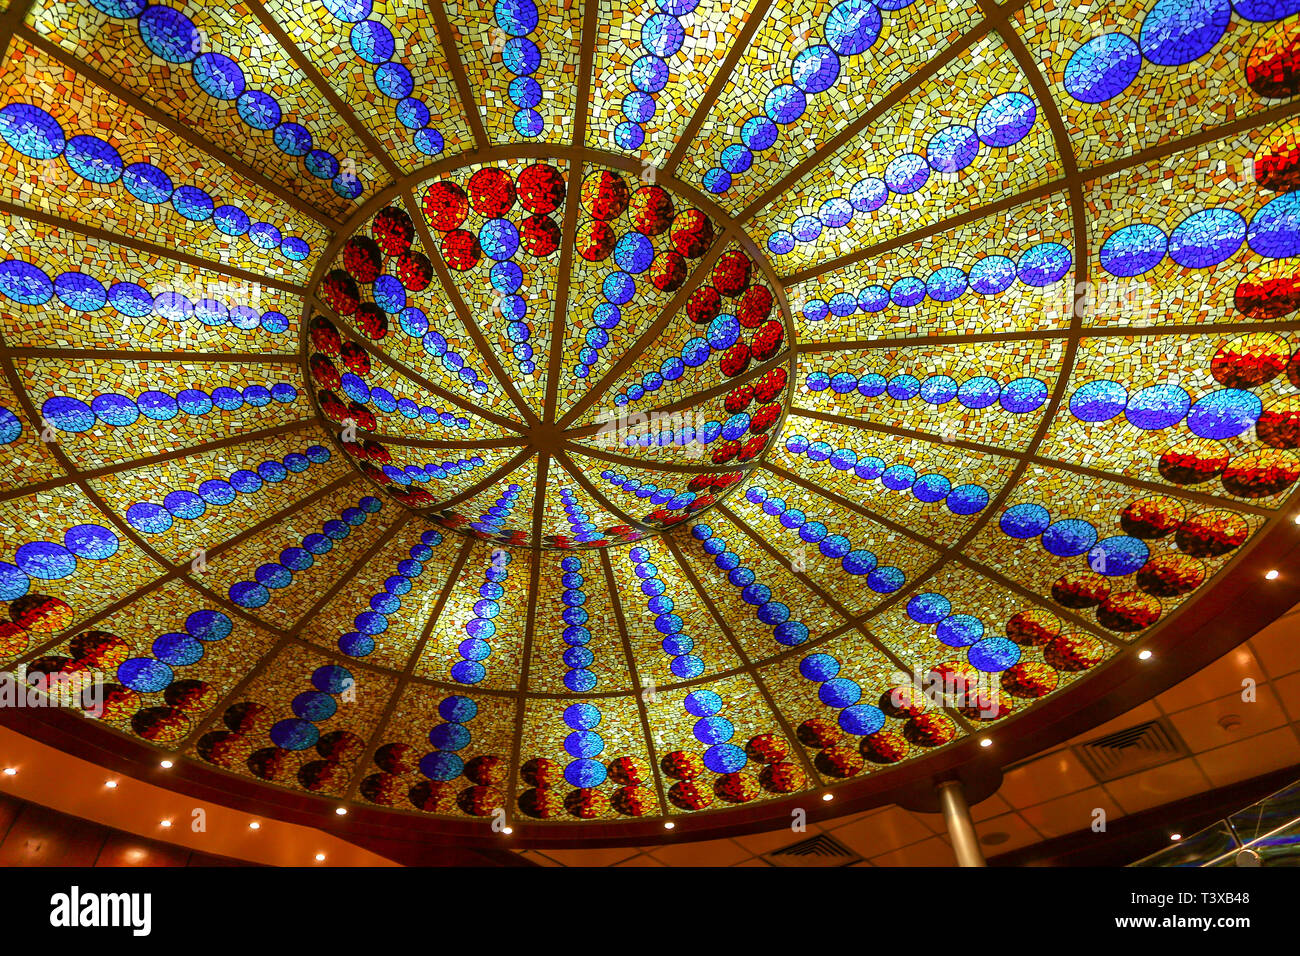 An ornate ceiling and lighting in a cruise ship Stock Photo